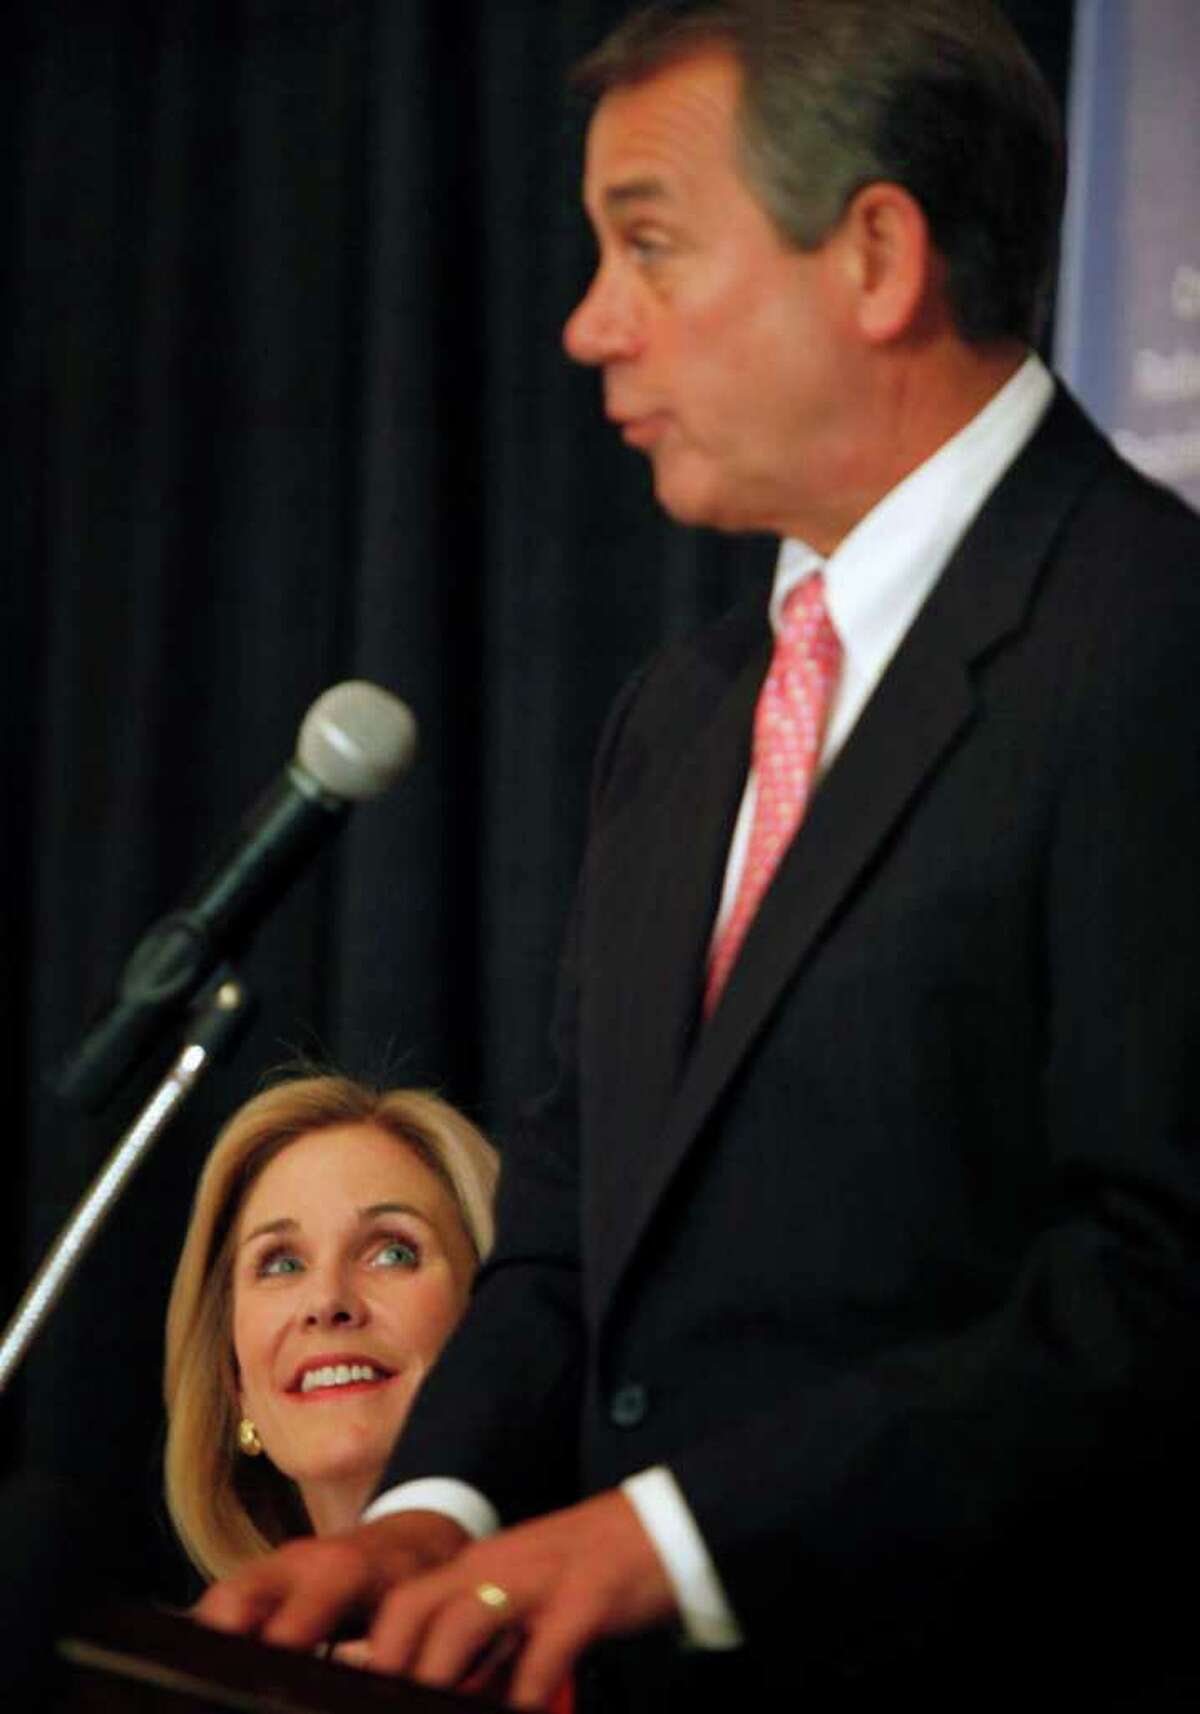 Speaker of the House John Boehner, right, R-Ohio, speaks as Republican candidate for the 26th District Congressional seat Jane Corwin, left, listens during a fundraiser in Depew, N.Y. Monday, May 9, 2011. Three candidates running for New York's open upstate congressional seat will debate for the first time next week. Democrat Kathleen Hochul (HOH'-kuhl), Republican Jane Corwin and Tea Party candidate Jack Davis will meet in Buffalo May 12. (AP Photo/David Duprey)